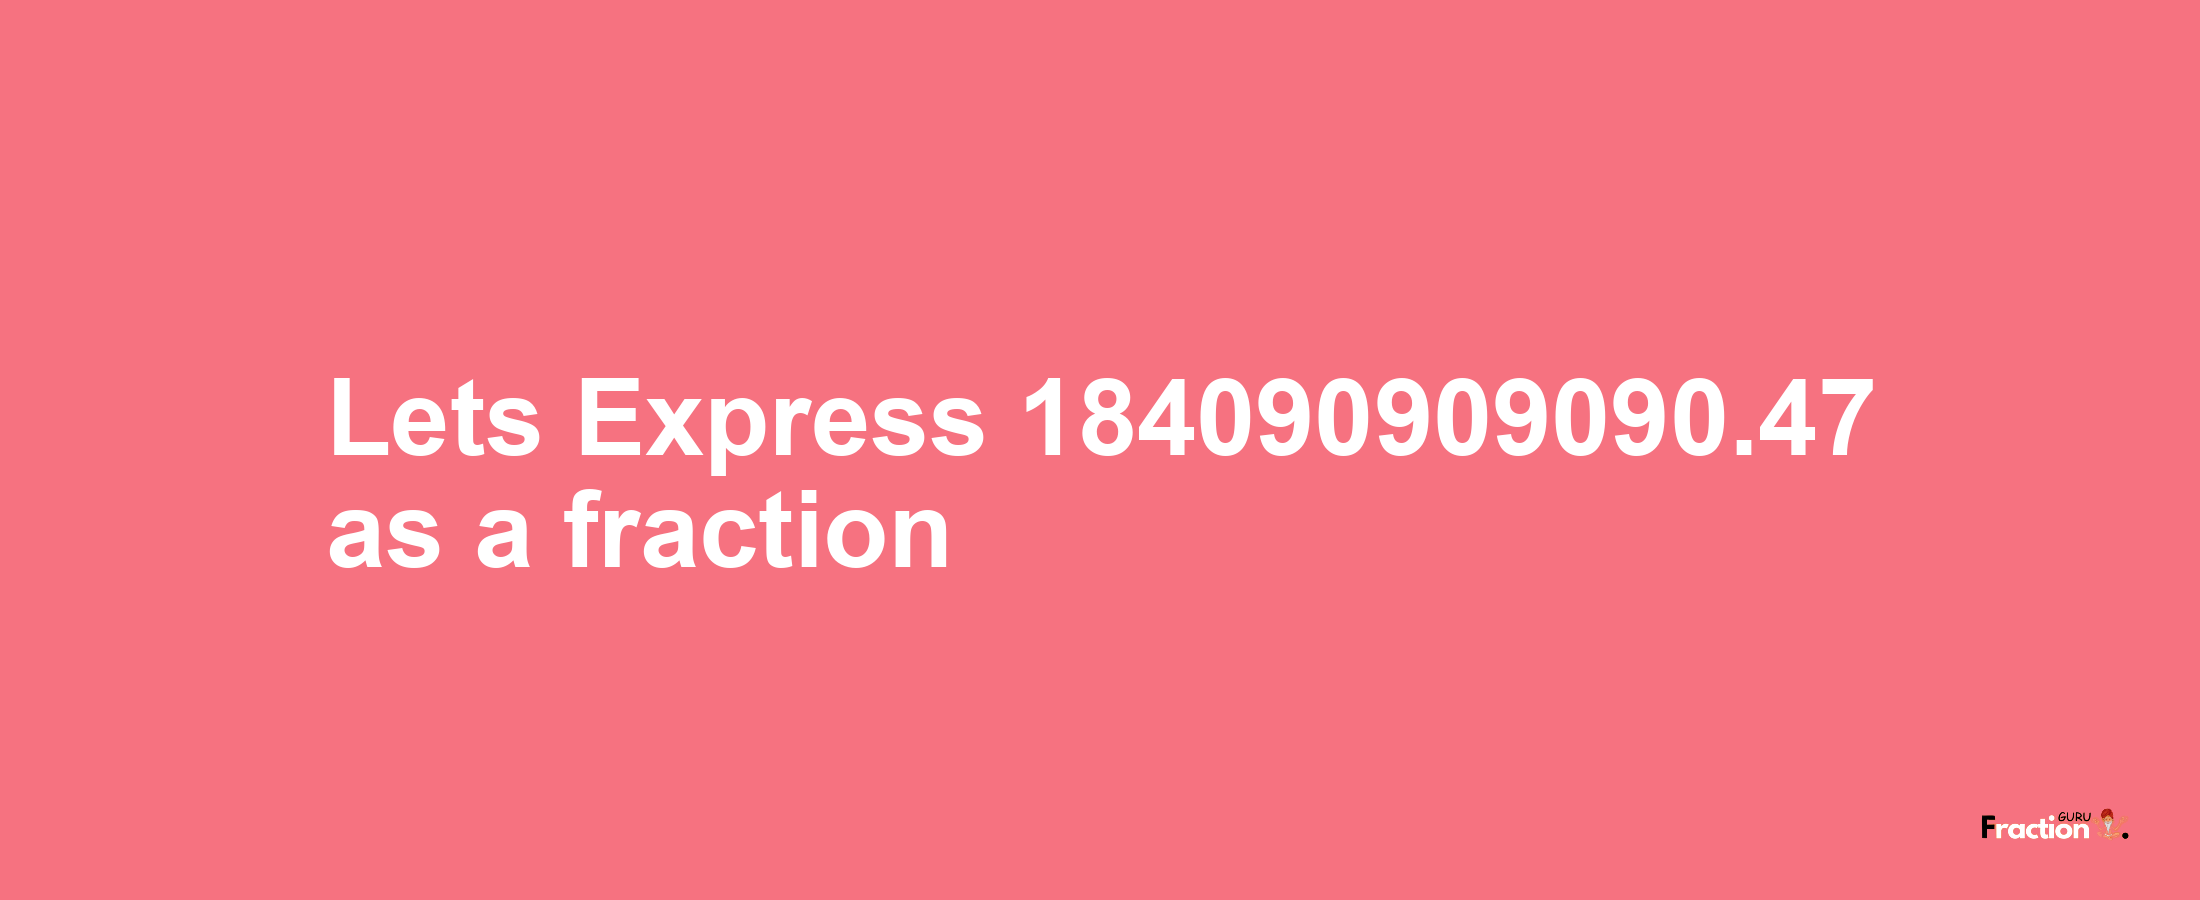 Lets Express 184090909090.47 as afraction